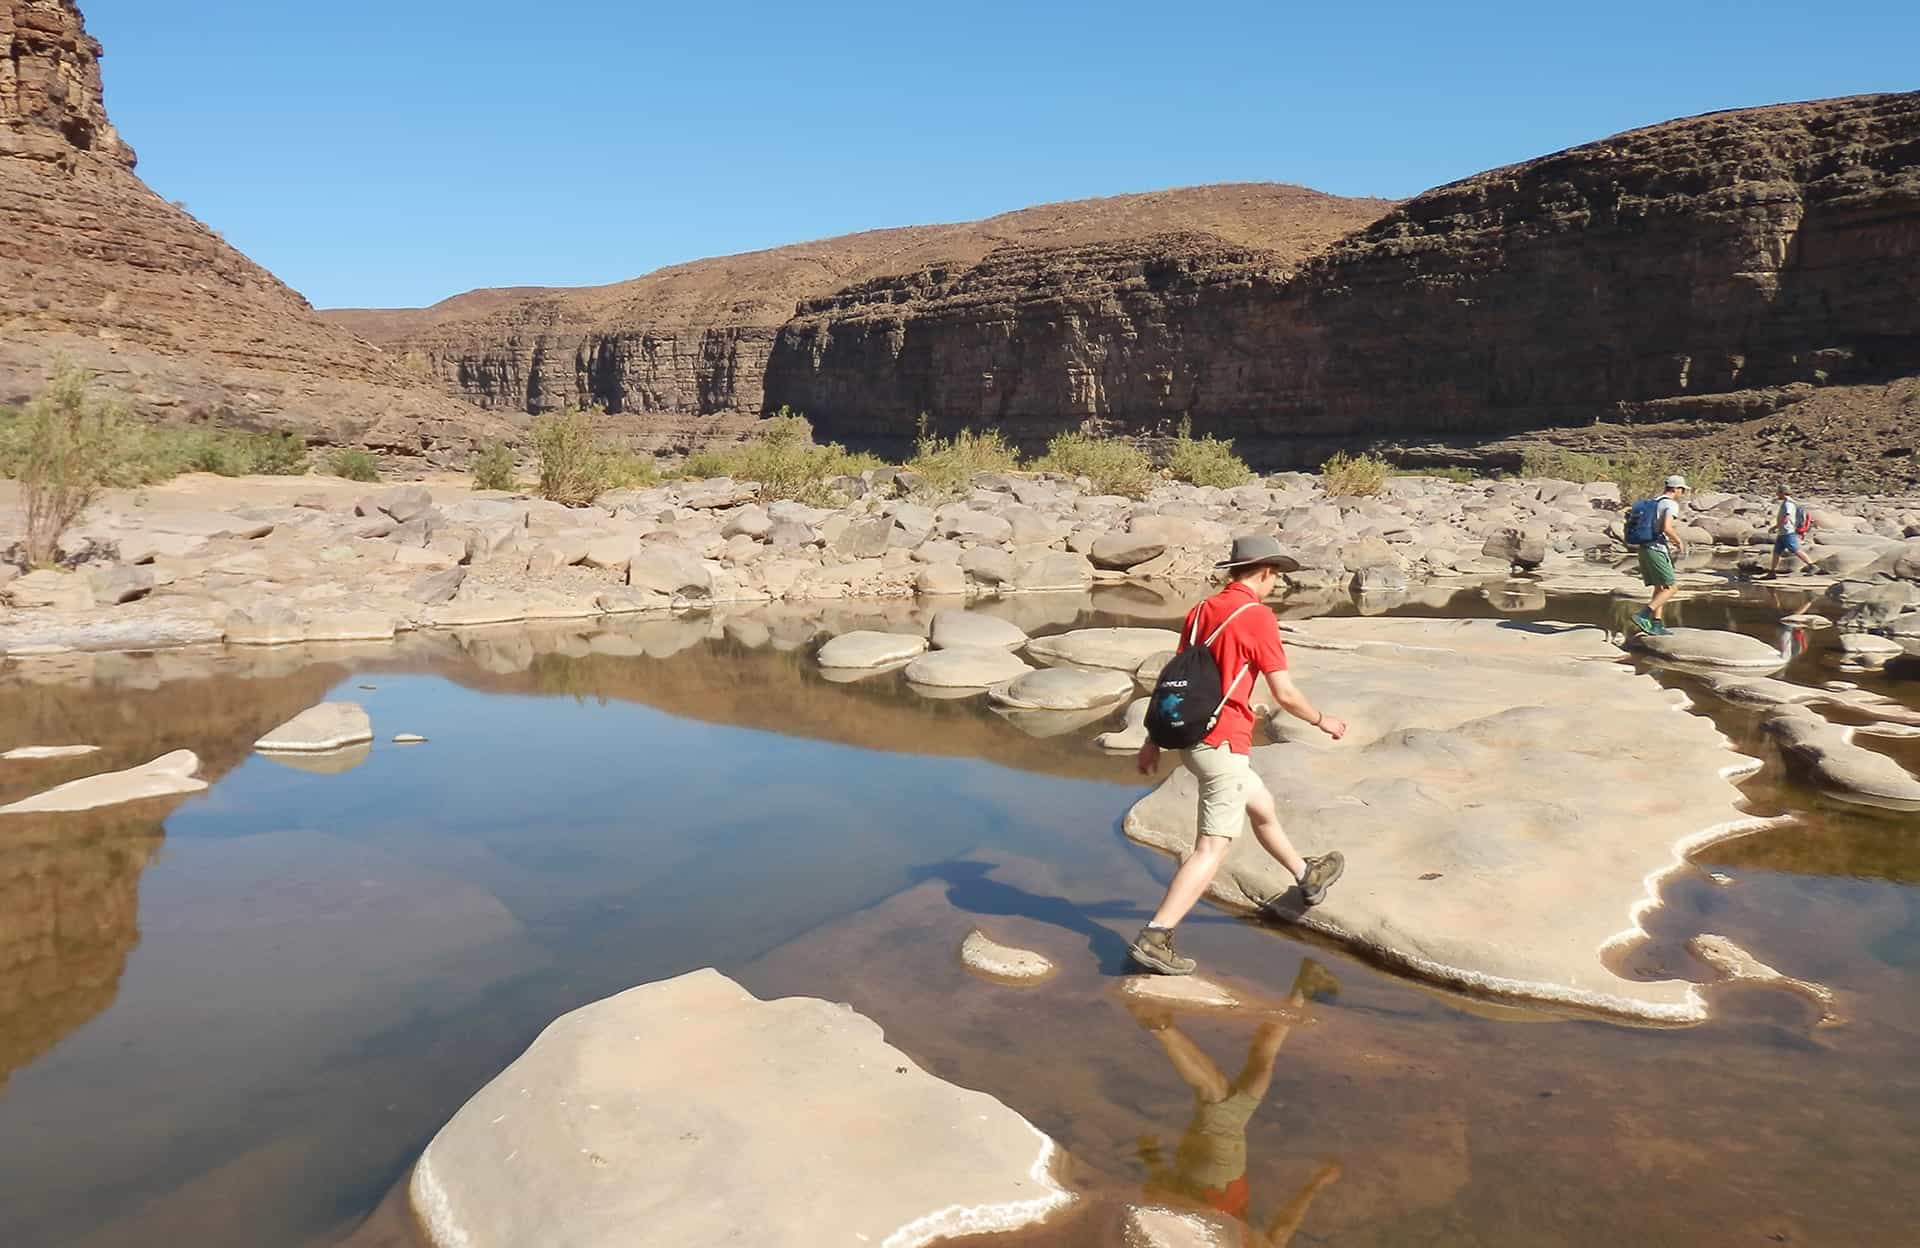 Hiking in the Fish River Canyon